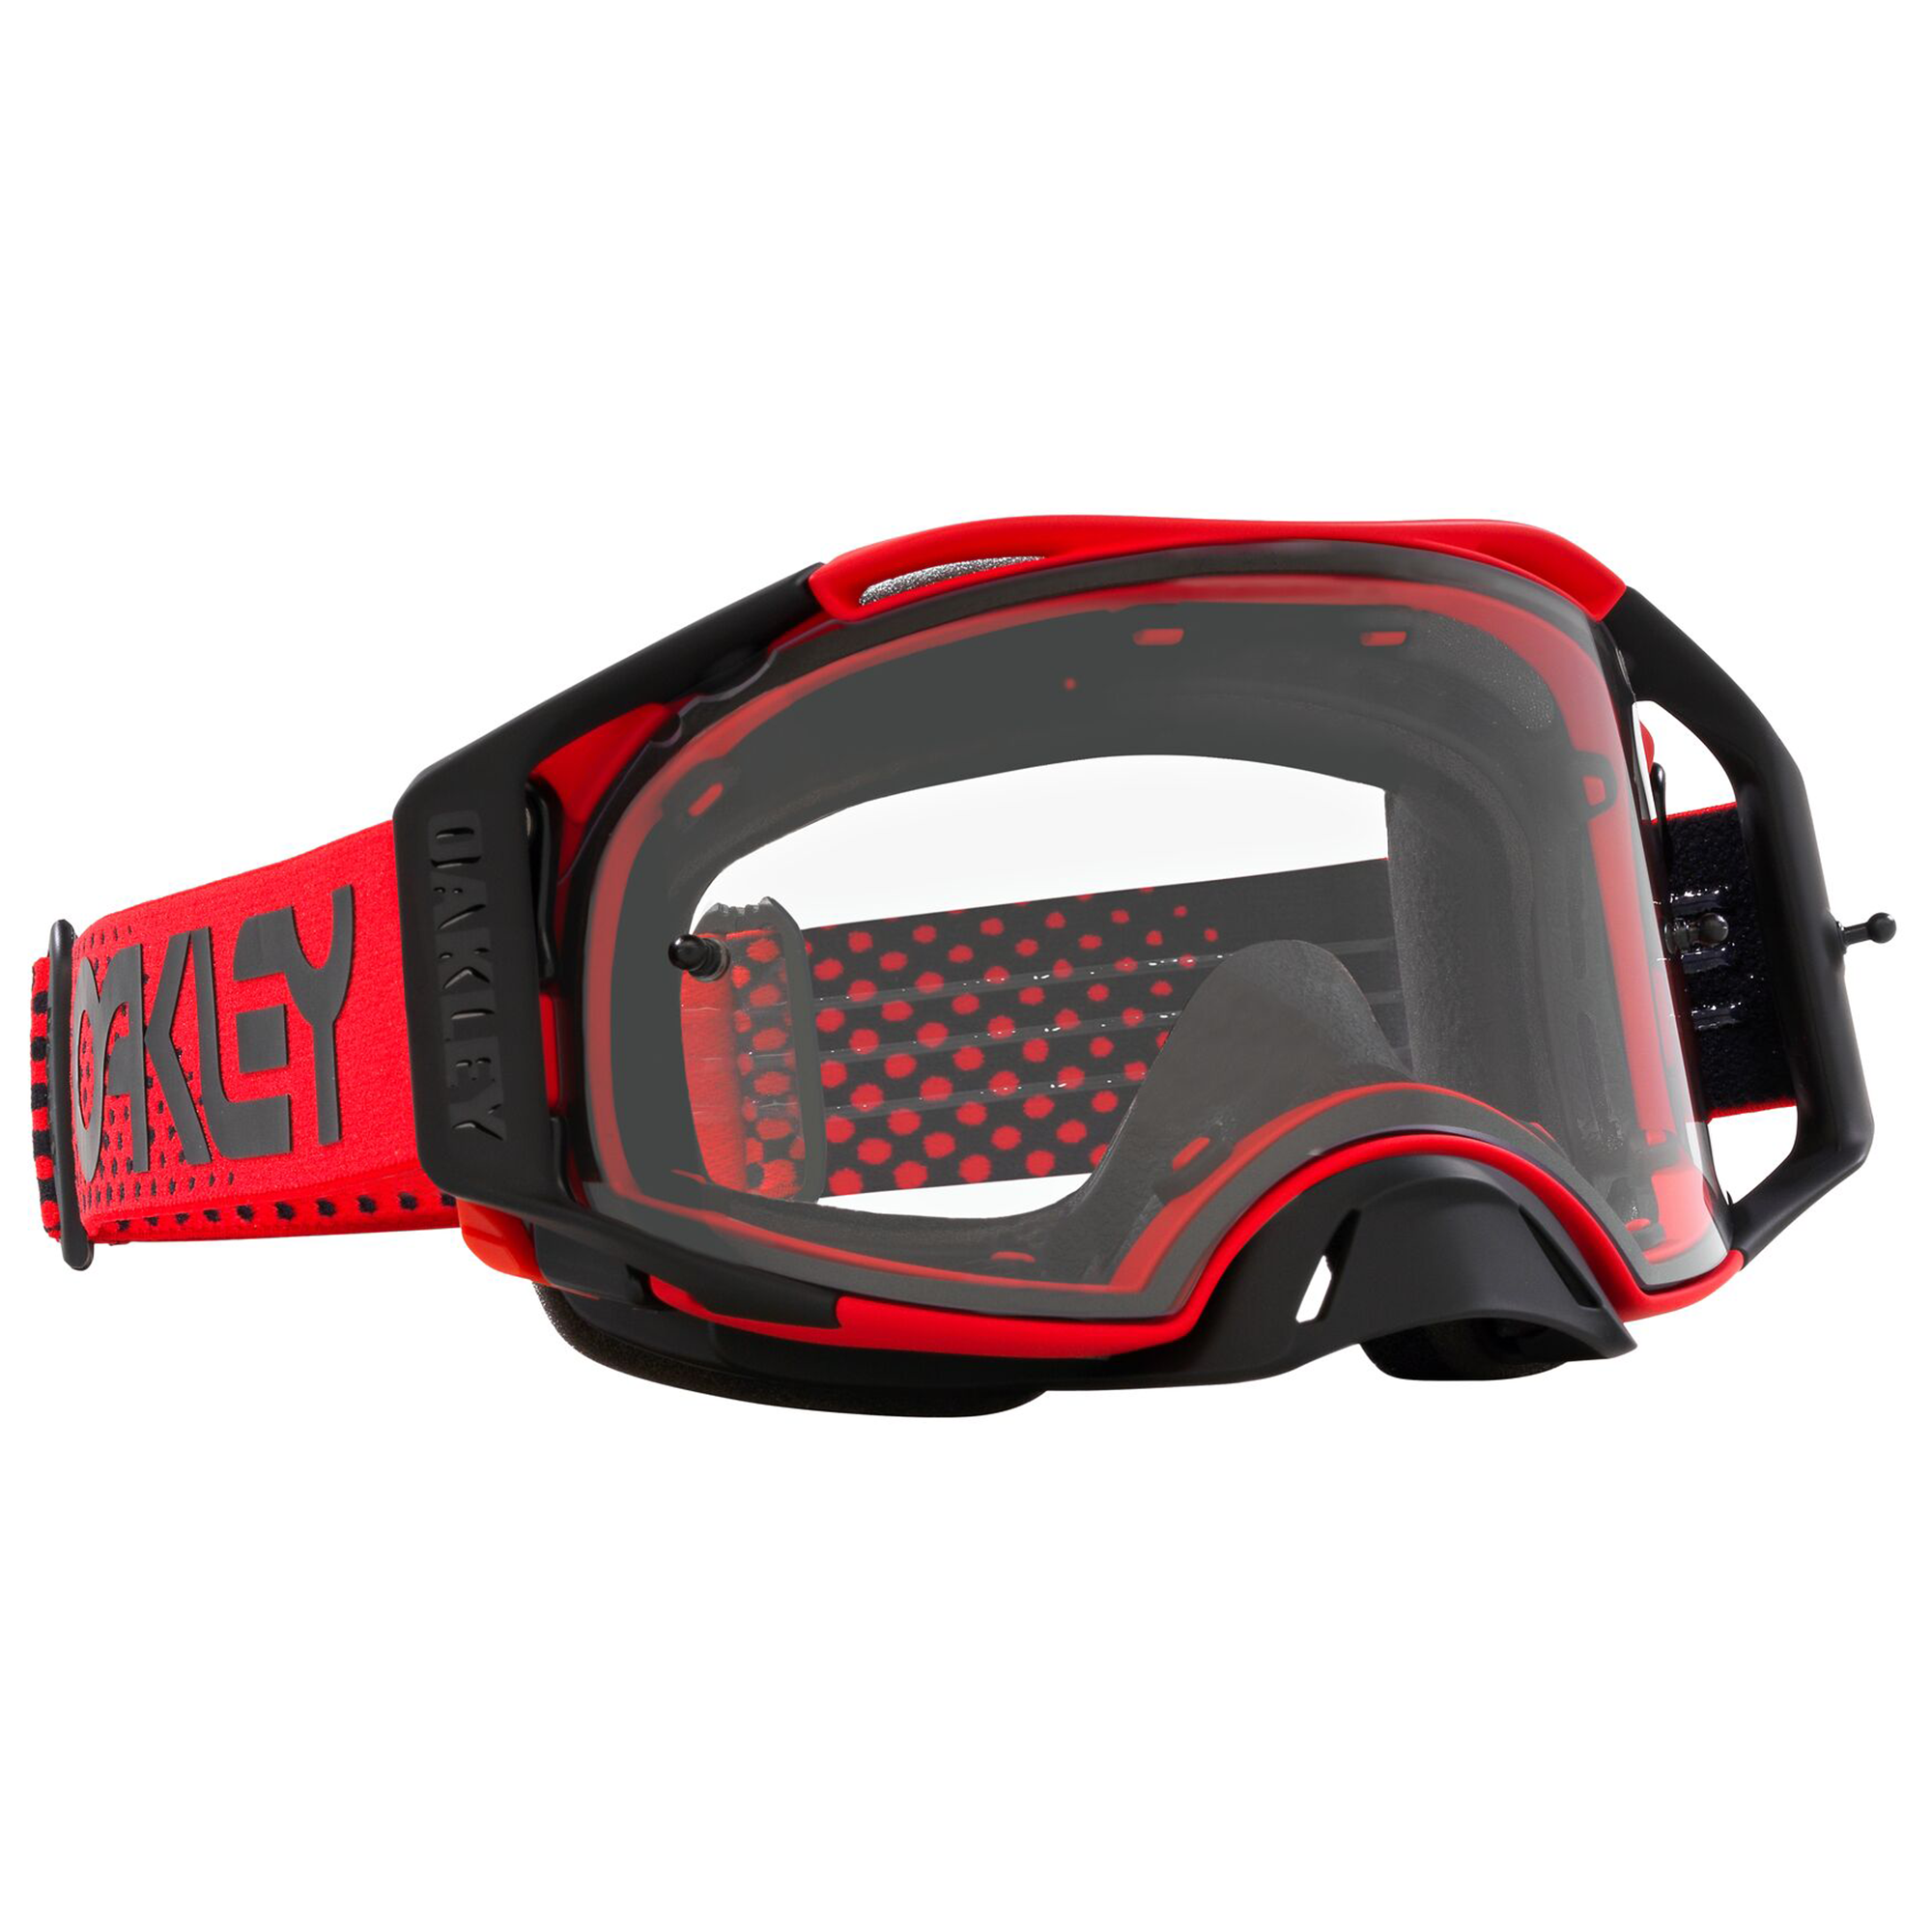 Oakley Airbrake MX Goggle in Moto Red with Clear Lens